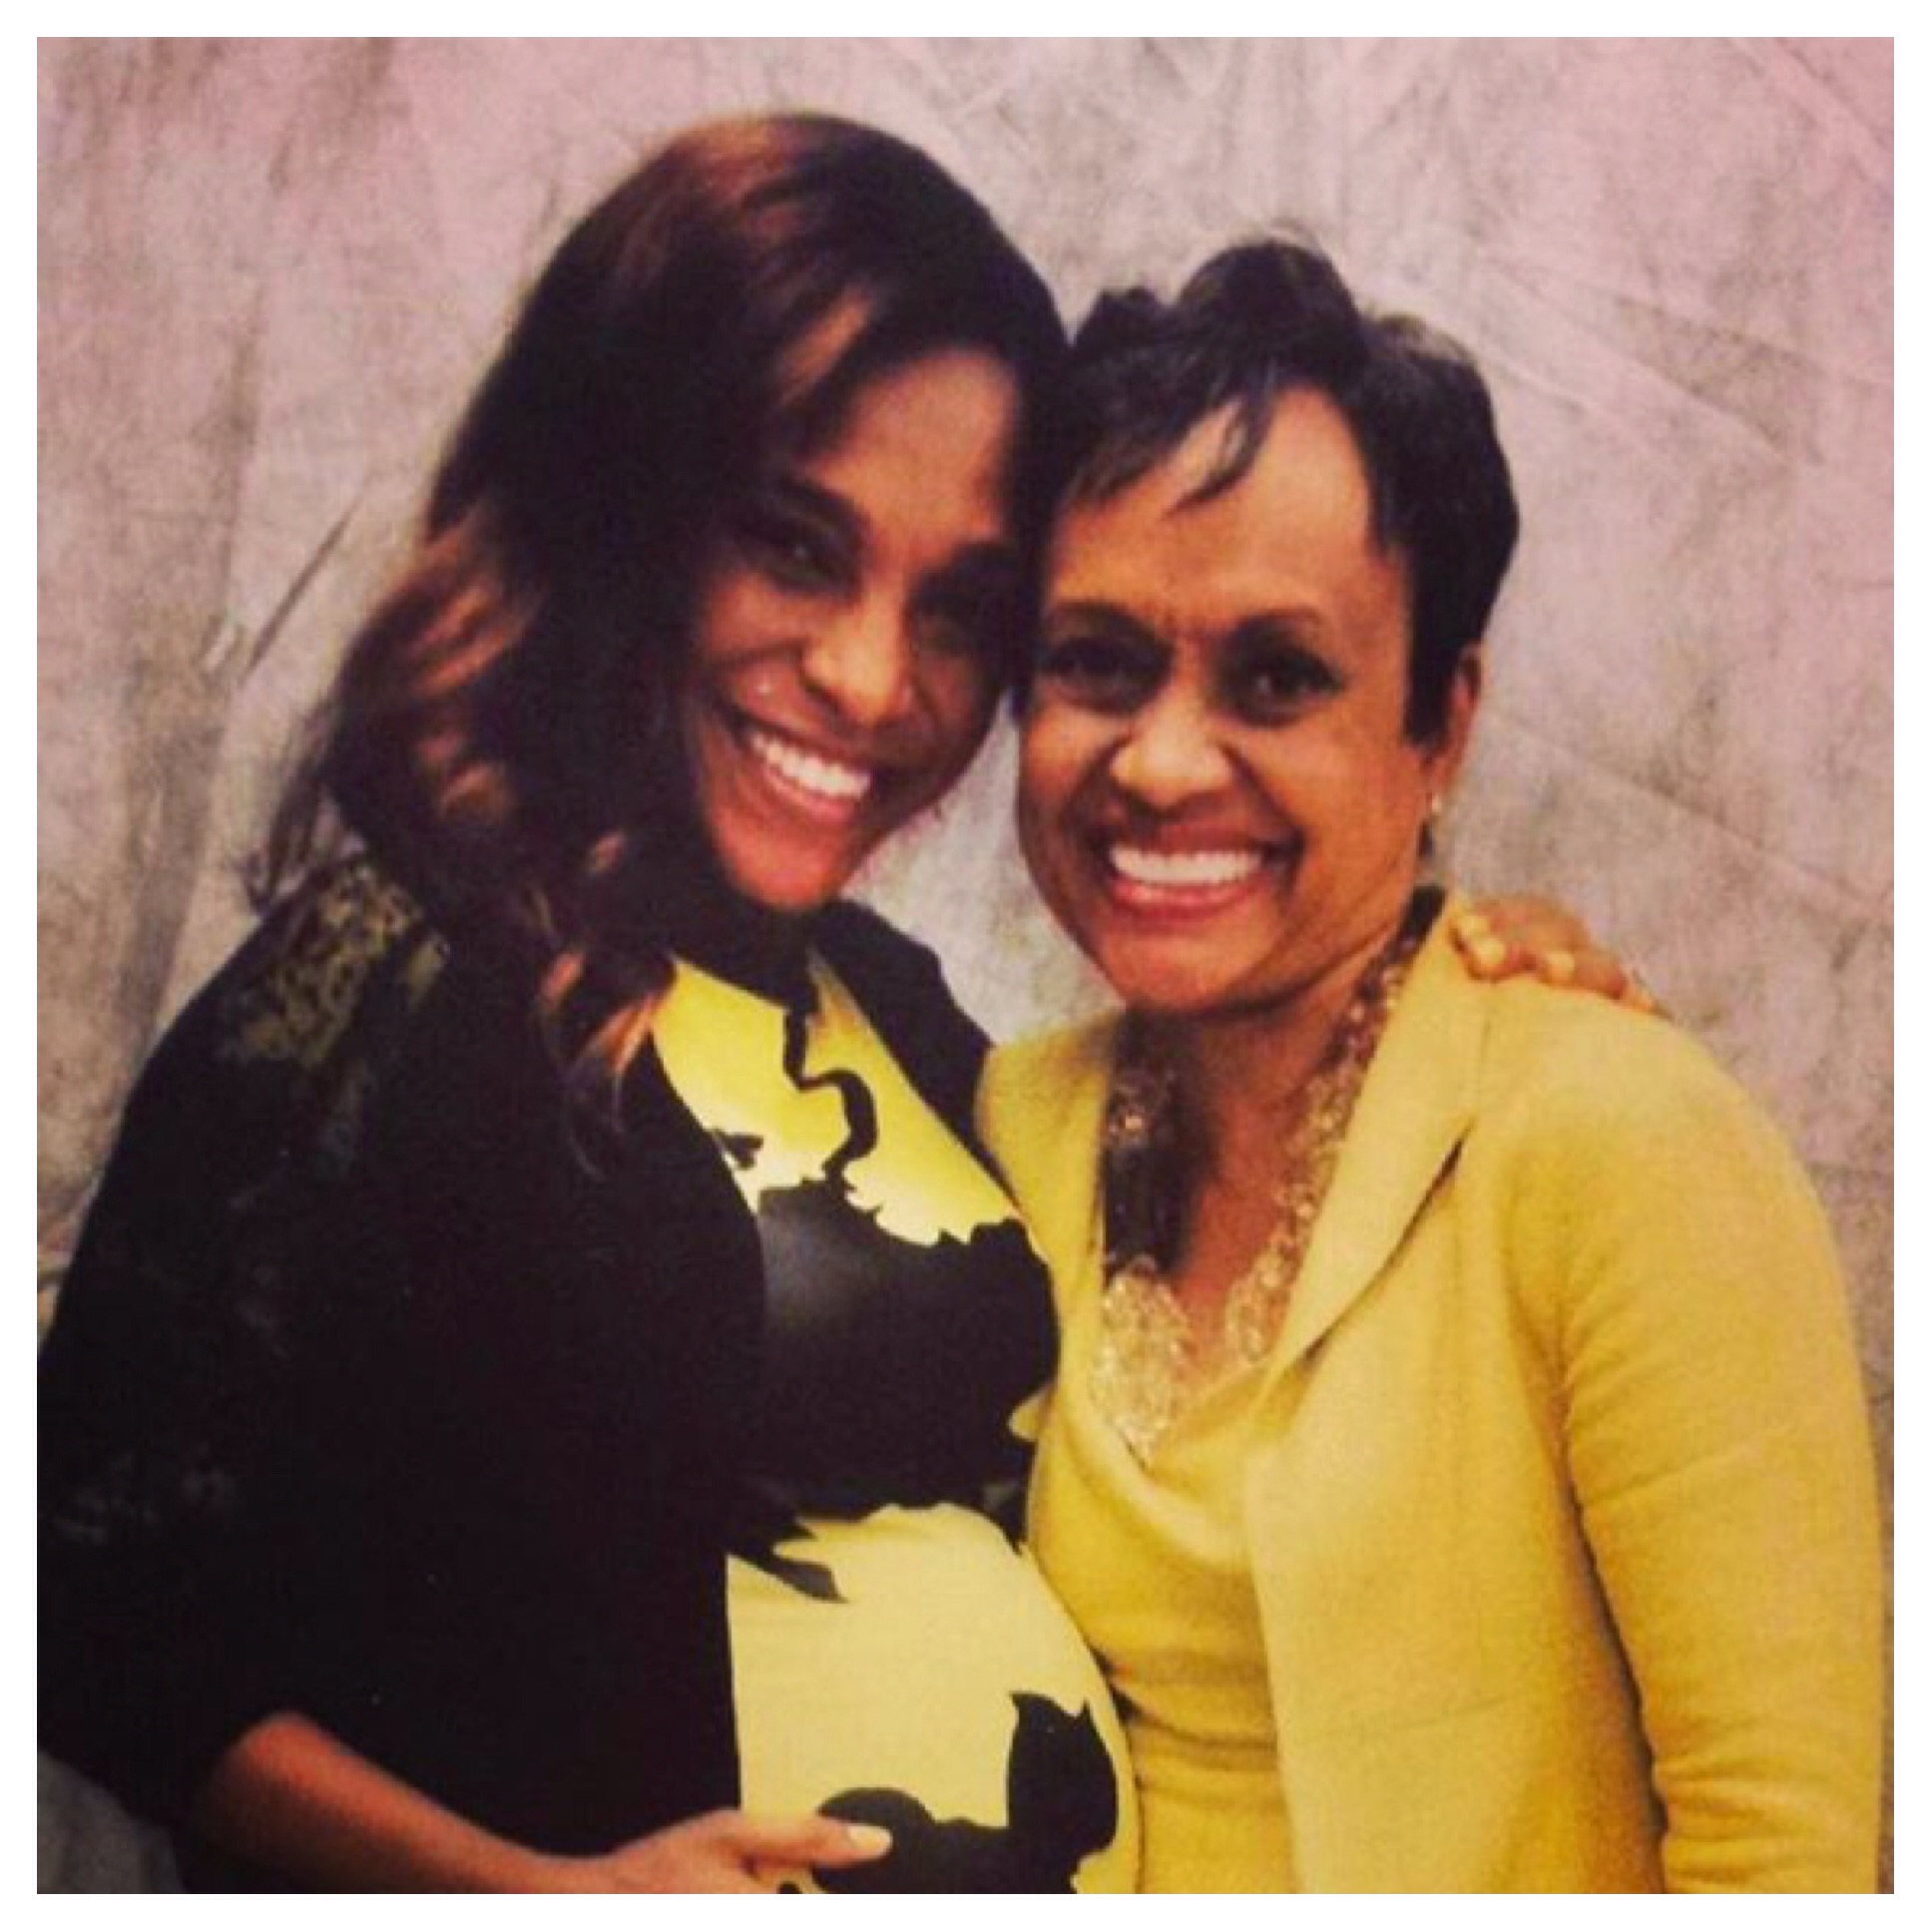 Judge Hatchett Fights For Justice When Beloved Daughter-In-Law Dies After C-Section.